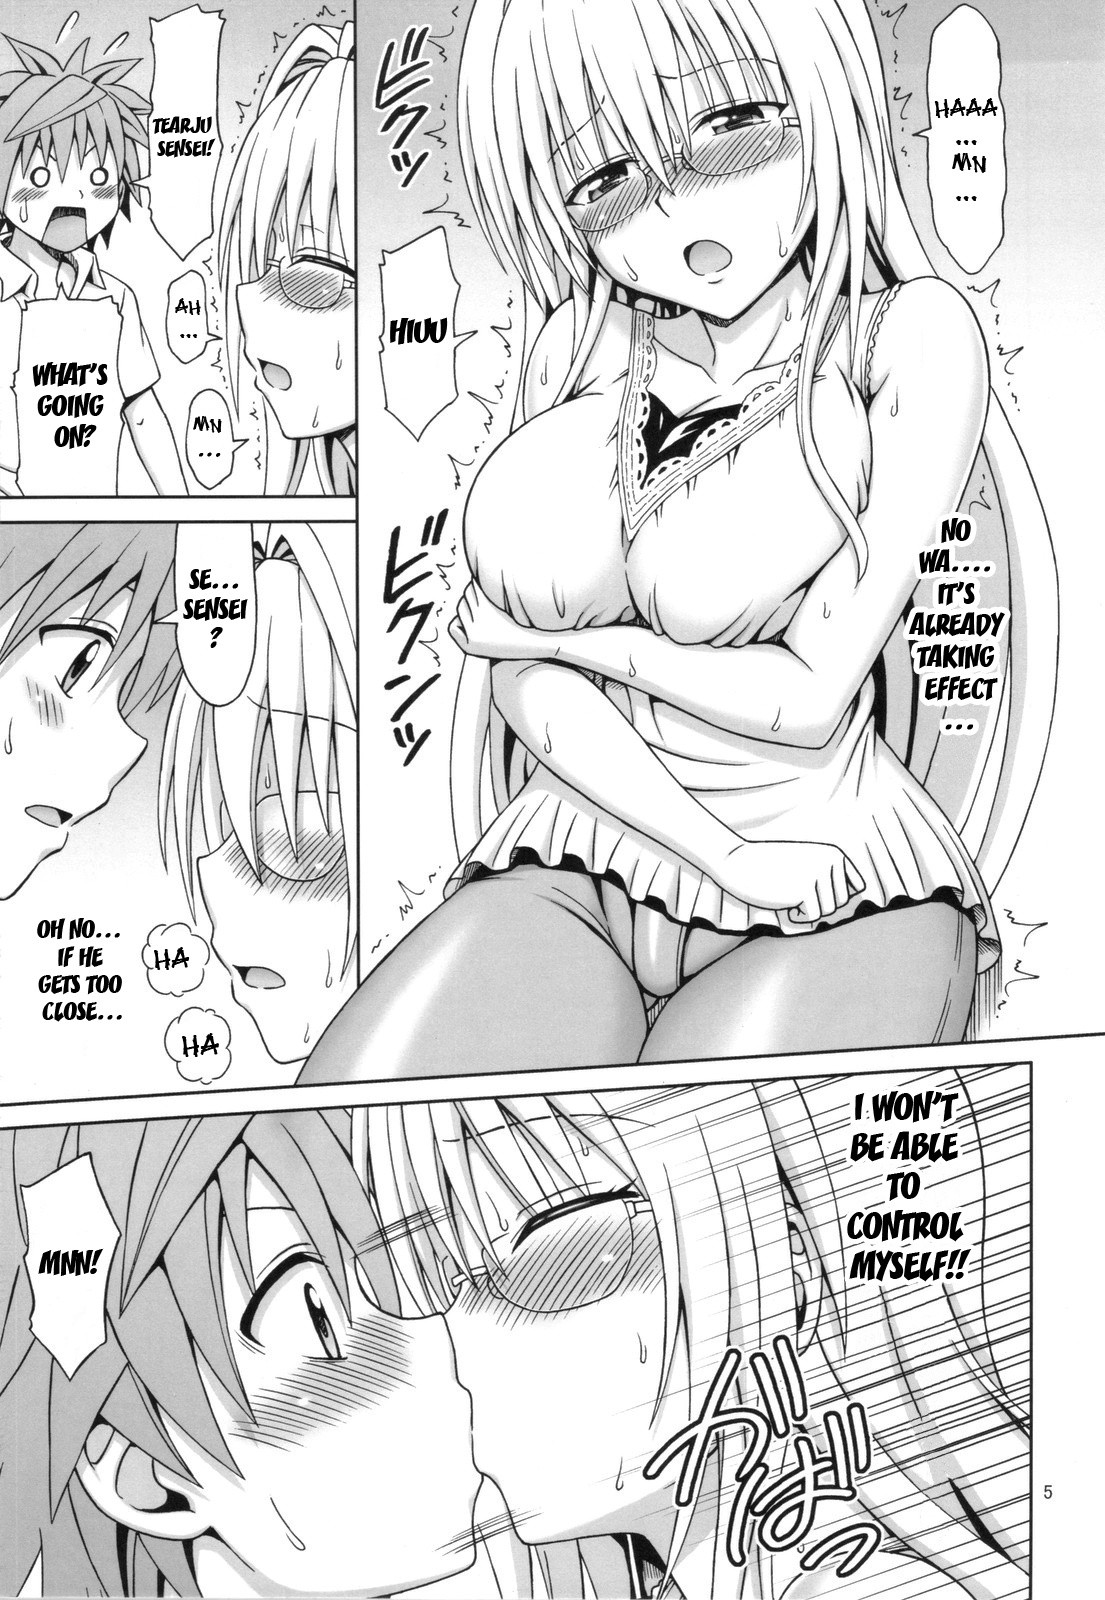 After-School Trouble hentai manga picture 4